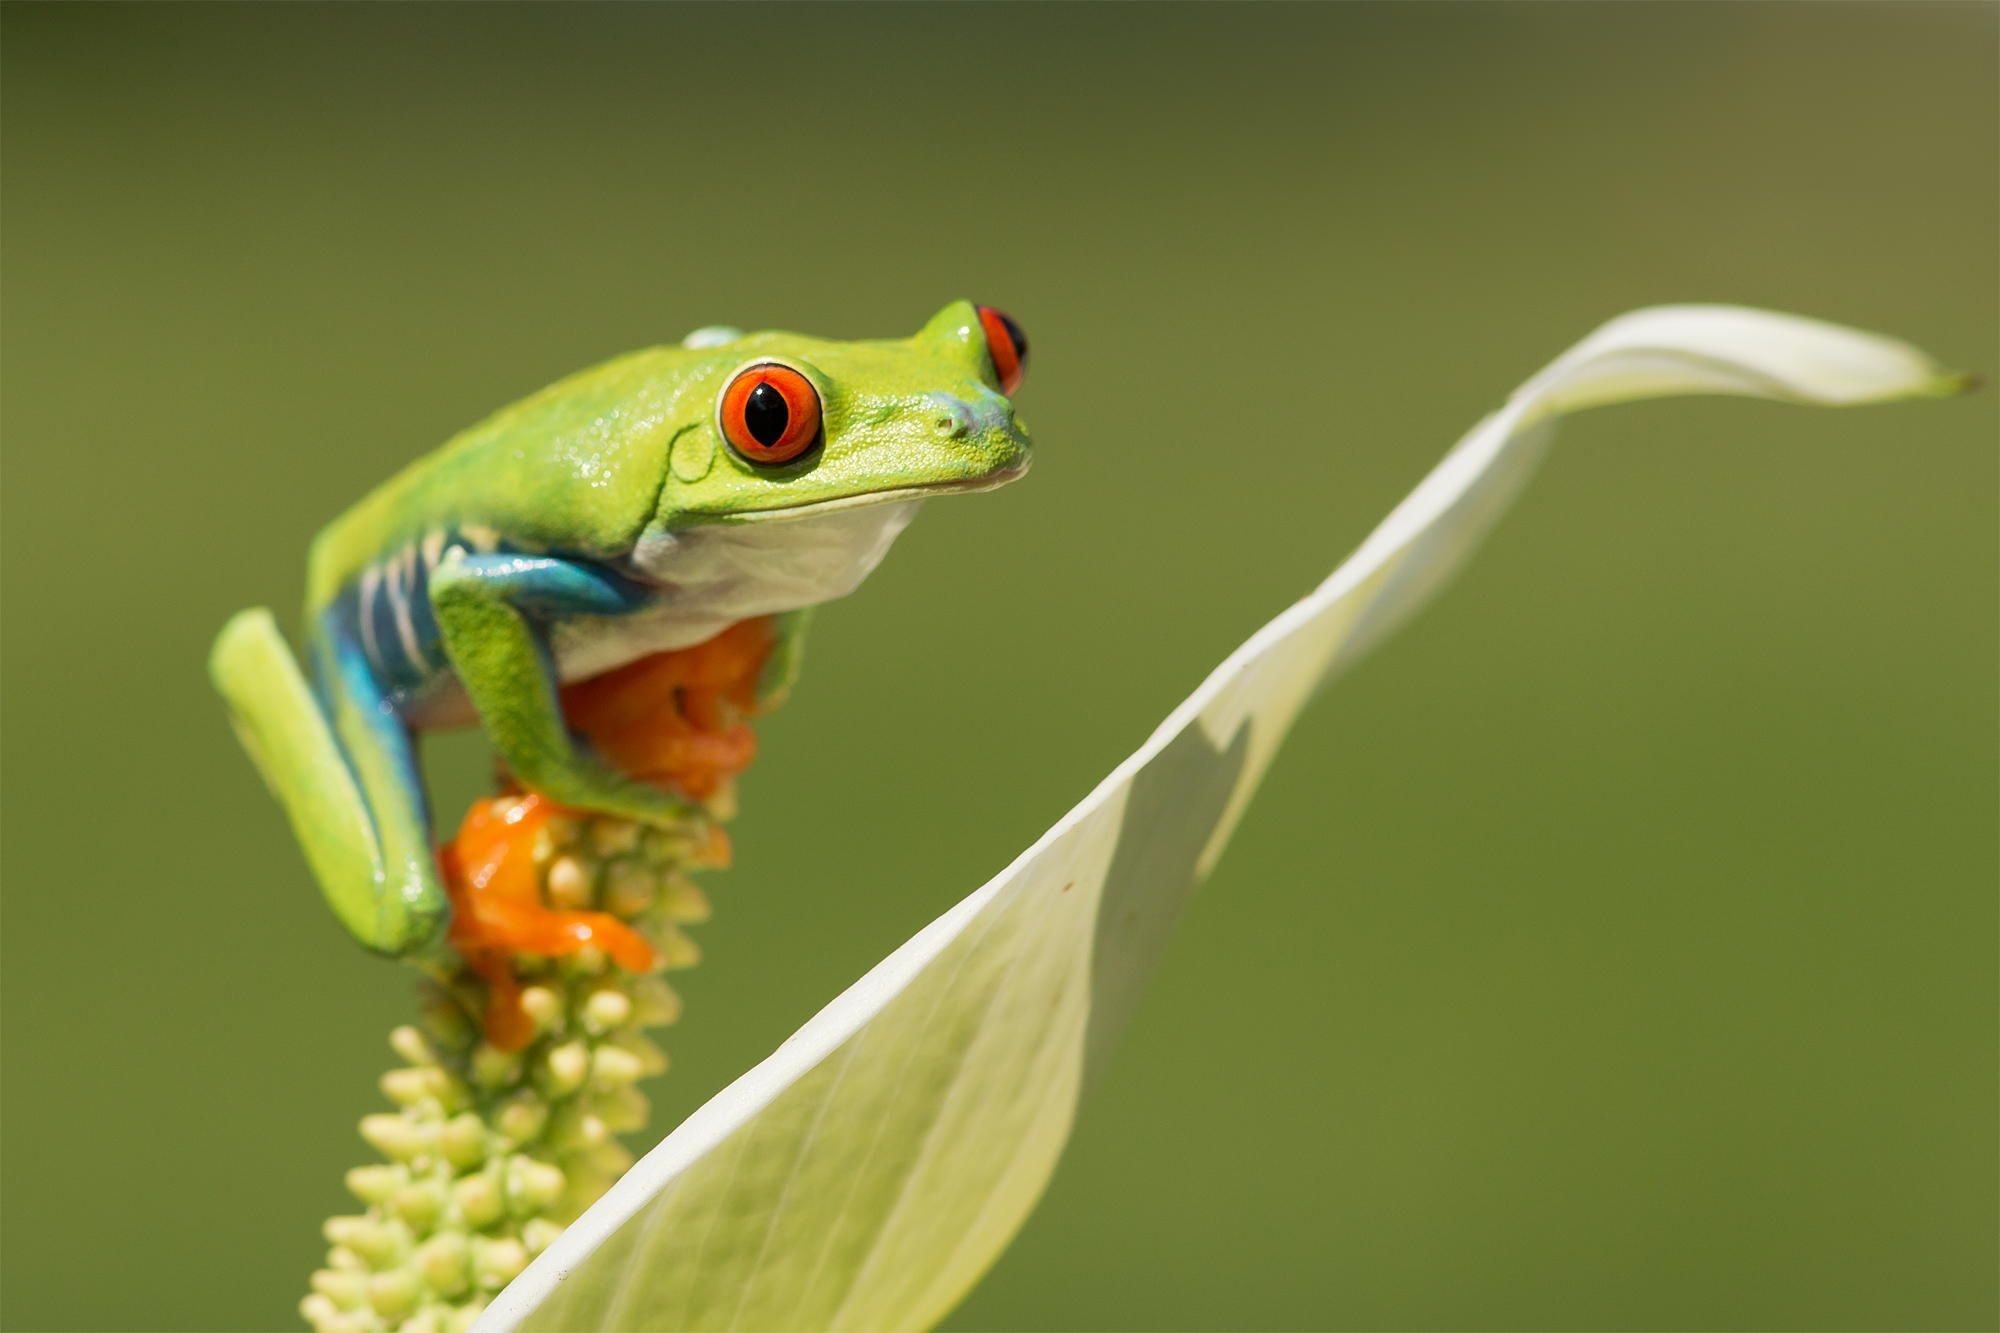 Stunning tree frogs, Remarkable red-eyed frog, Nature's wonders, Frog enthusiast, 2000x1340 HD Desktop